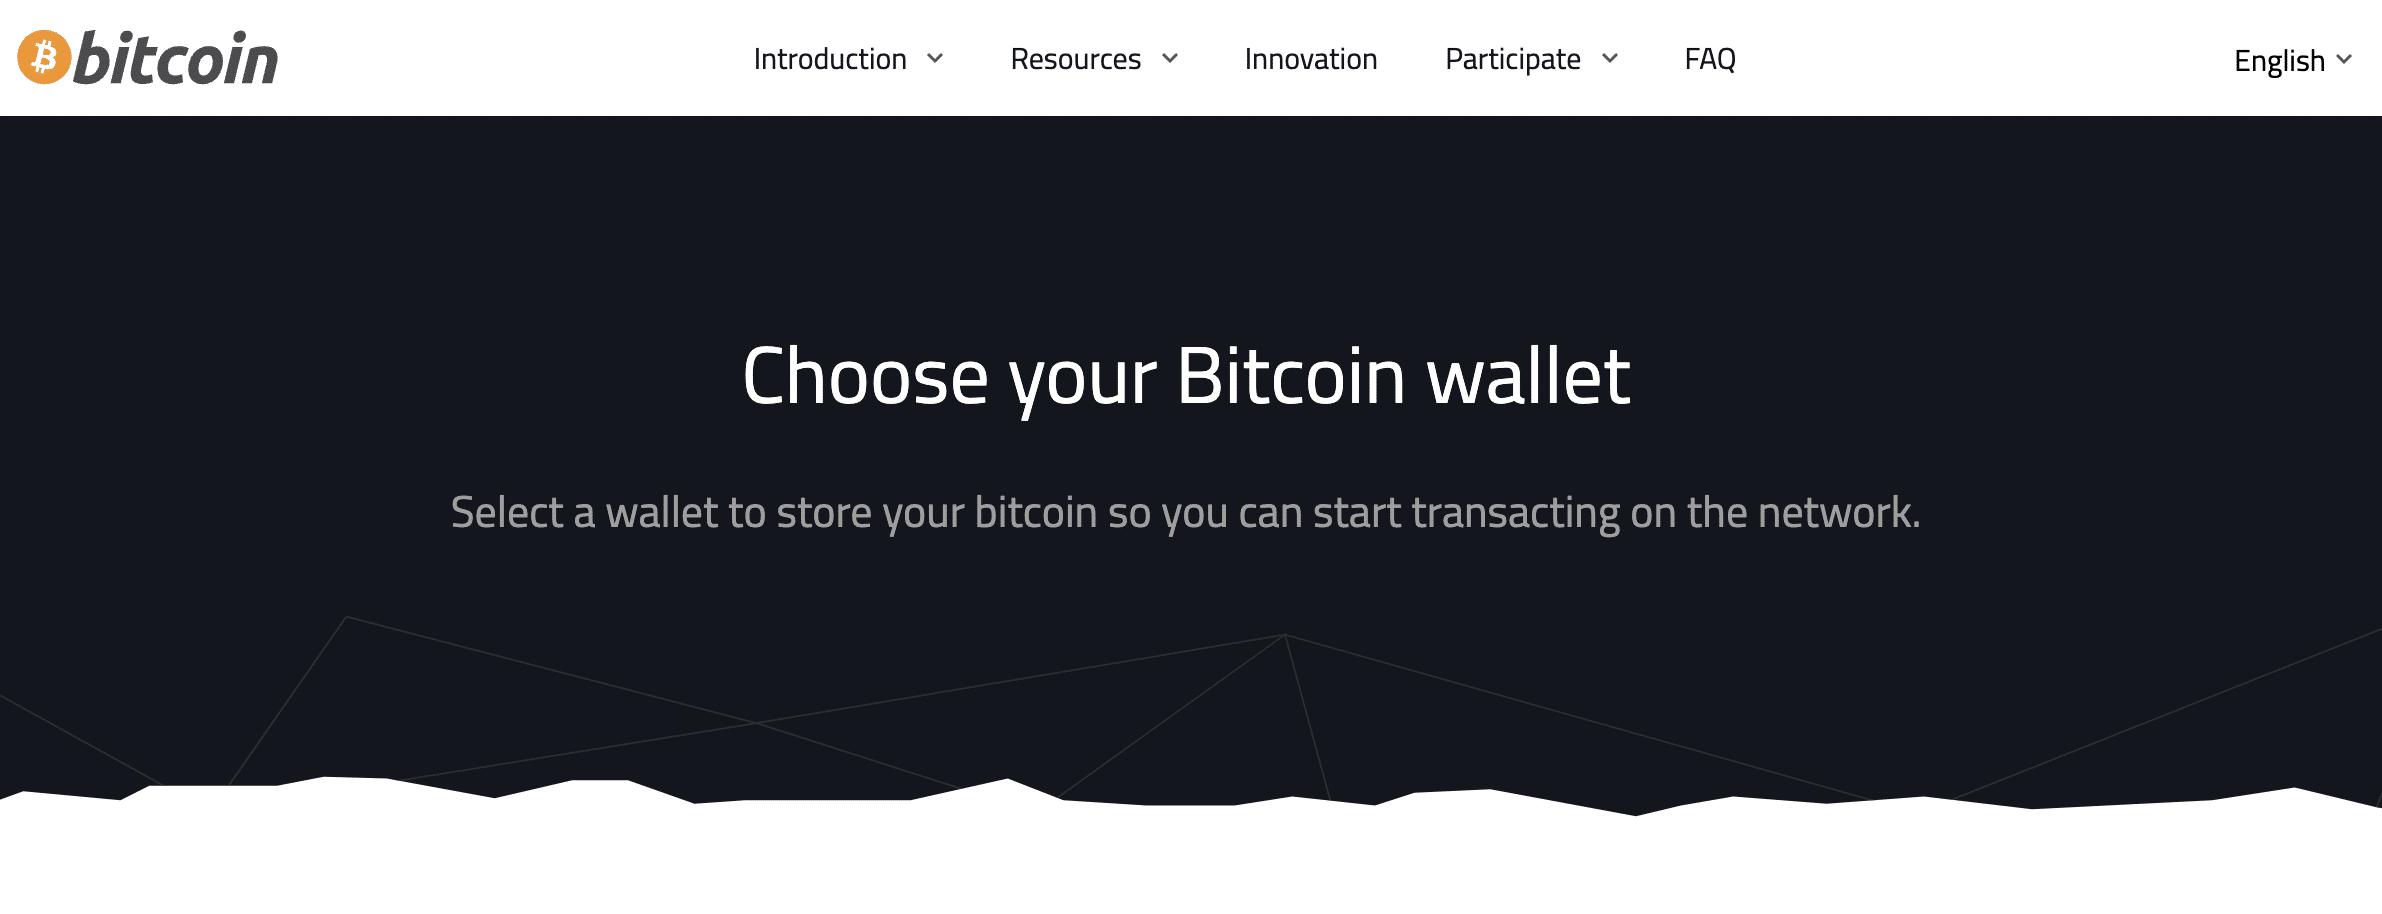 What are Bitcoin wallets?